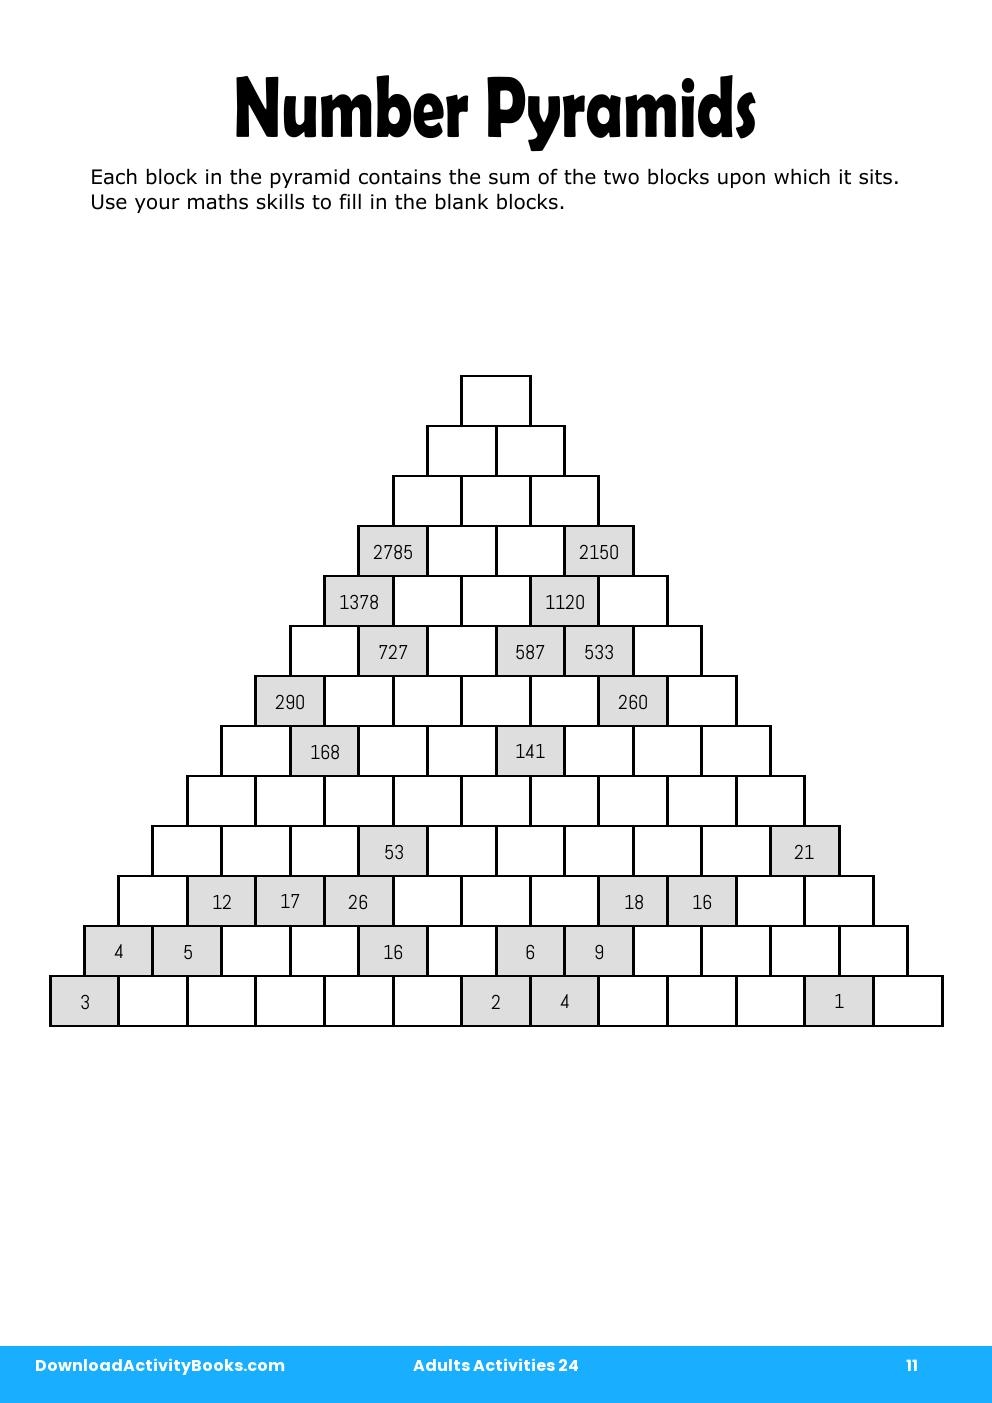 Number Pyramids in Adults Activities 24